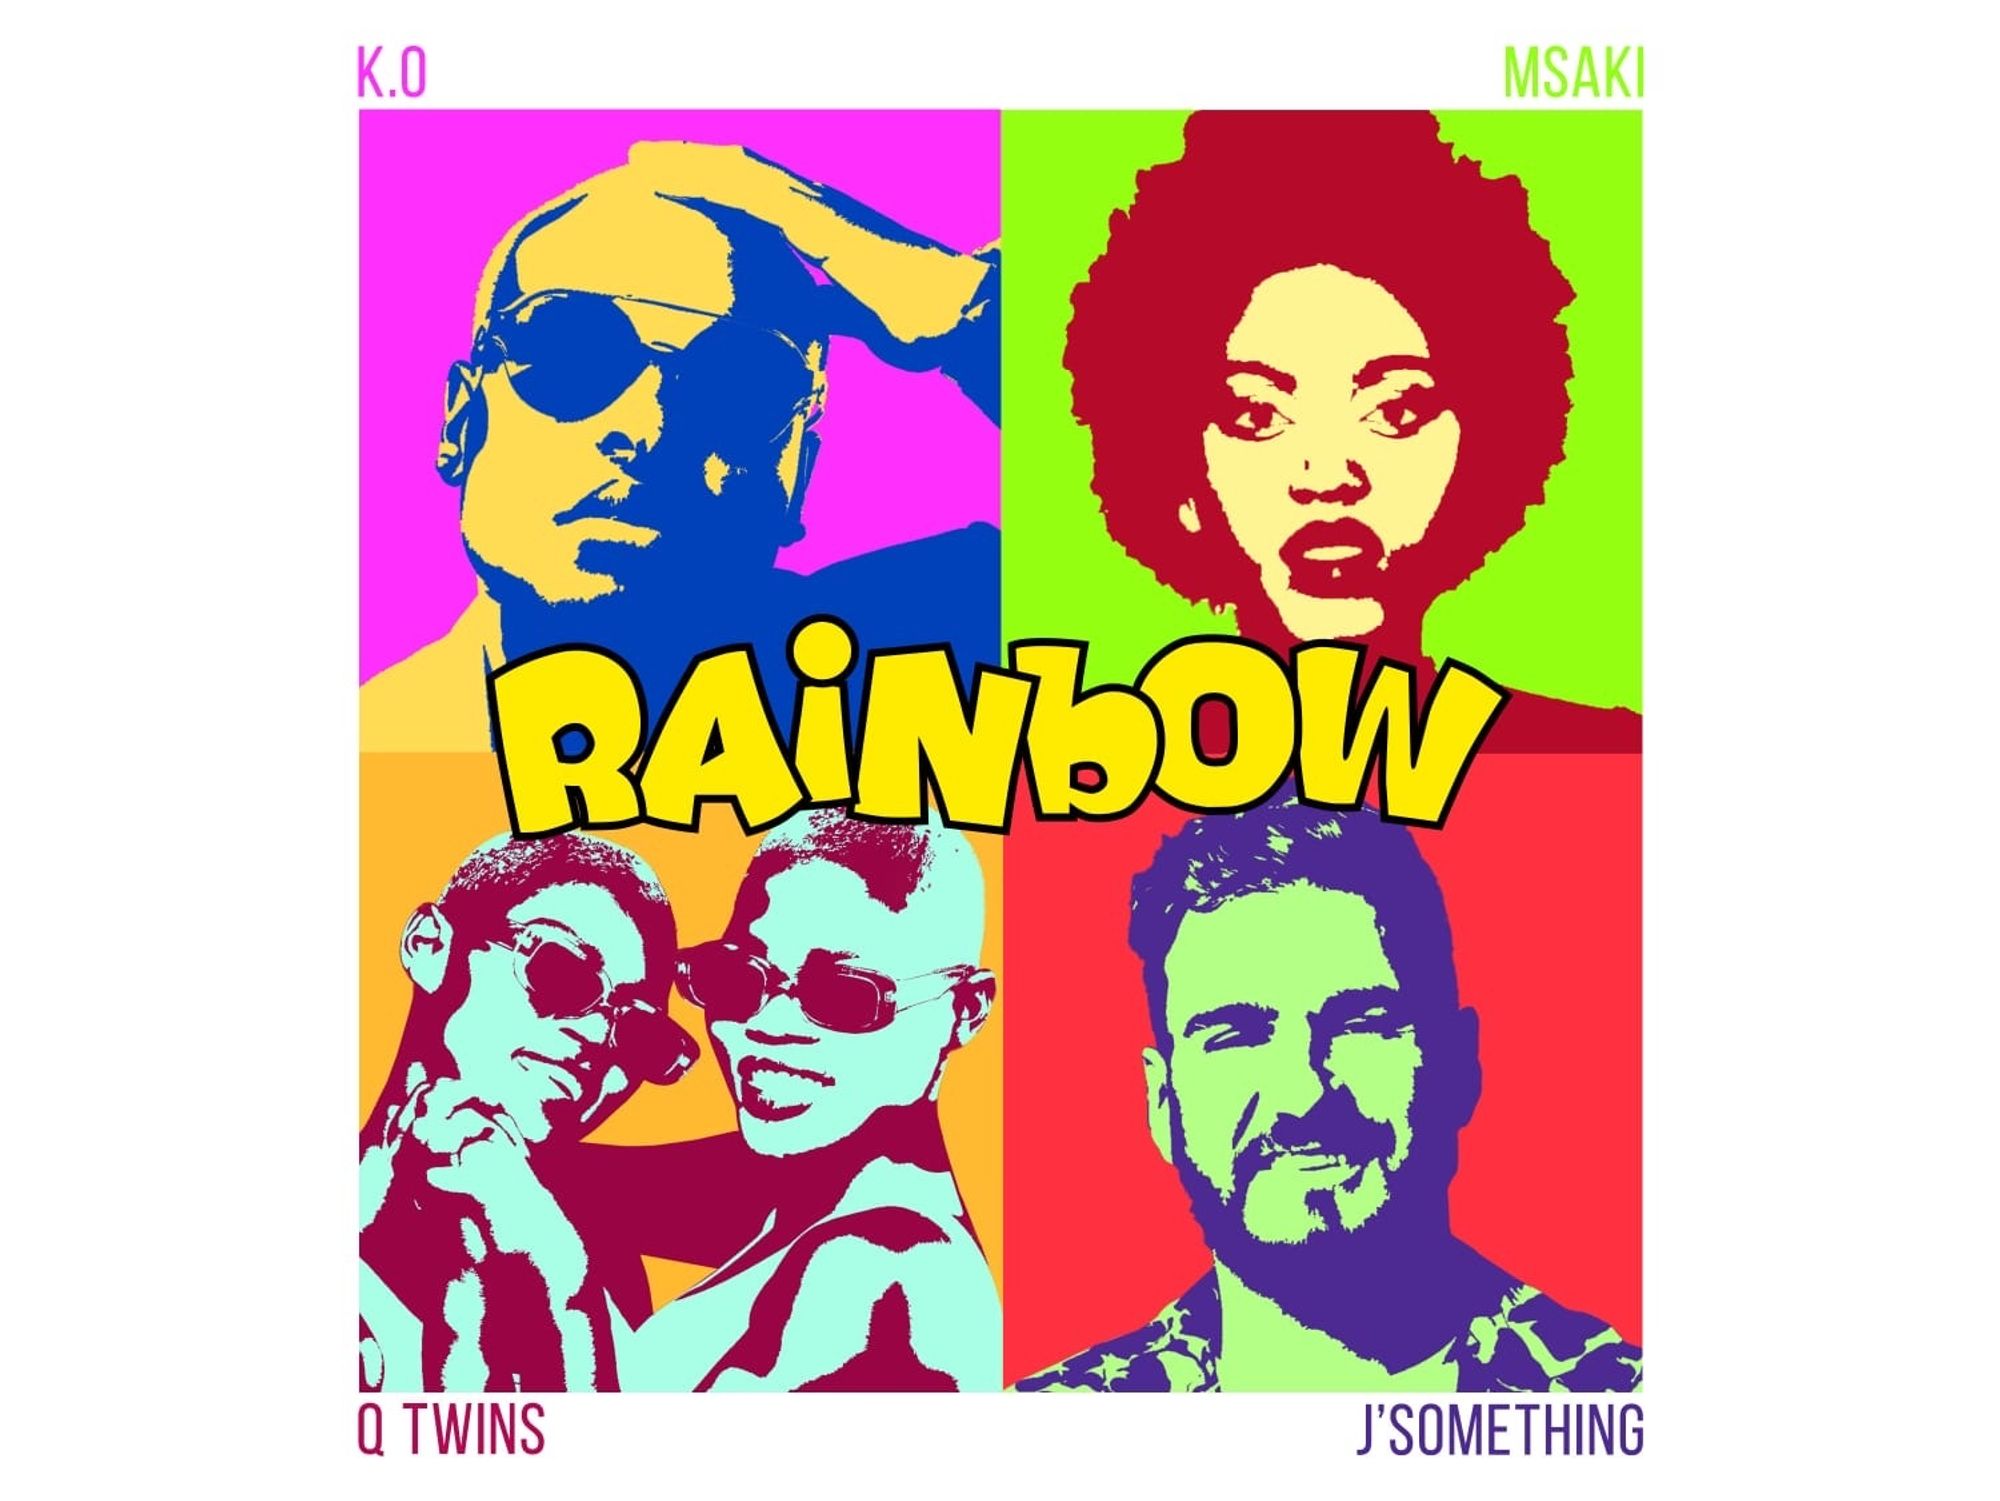 "Rainbow" single artwork: Floating text over a collage of portraits of K.O, Msaki, Q Twins and J'Something. 